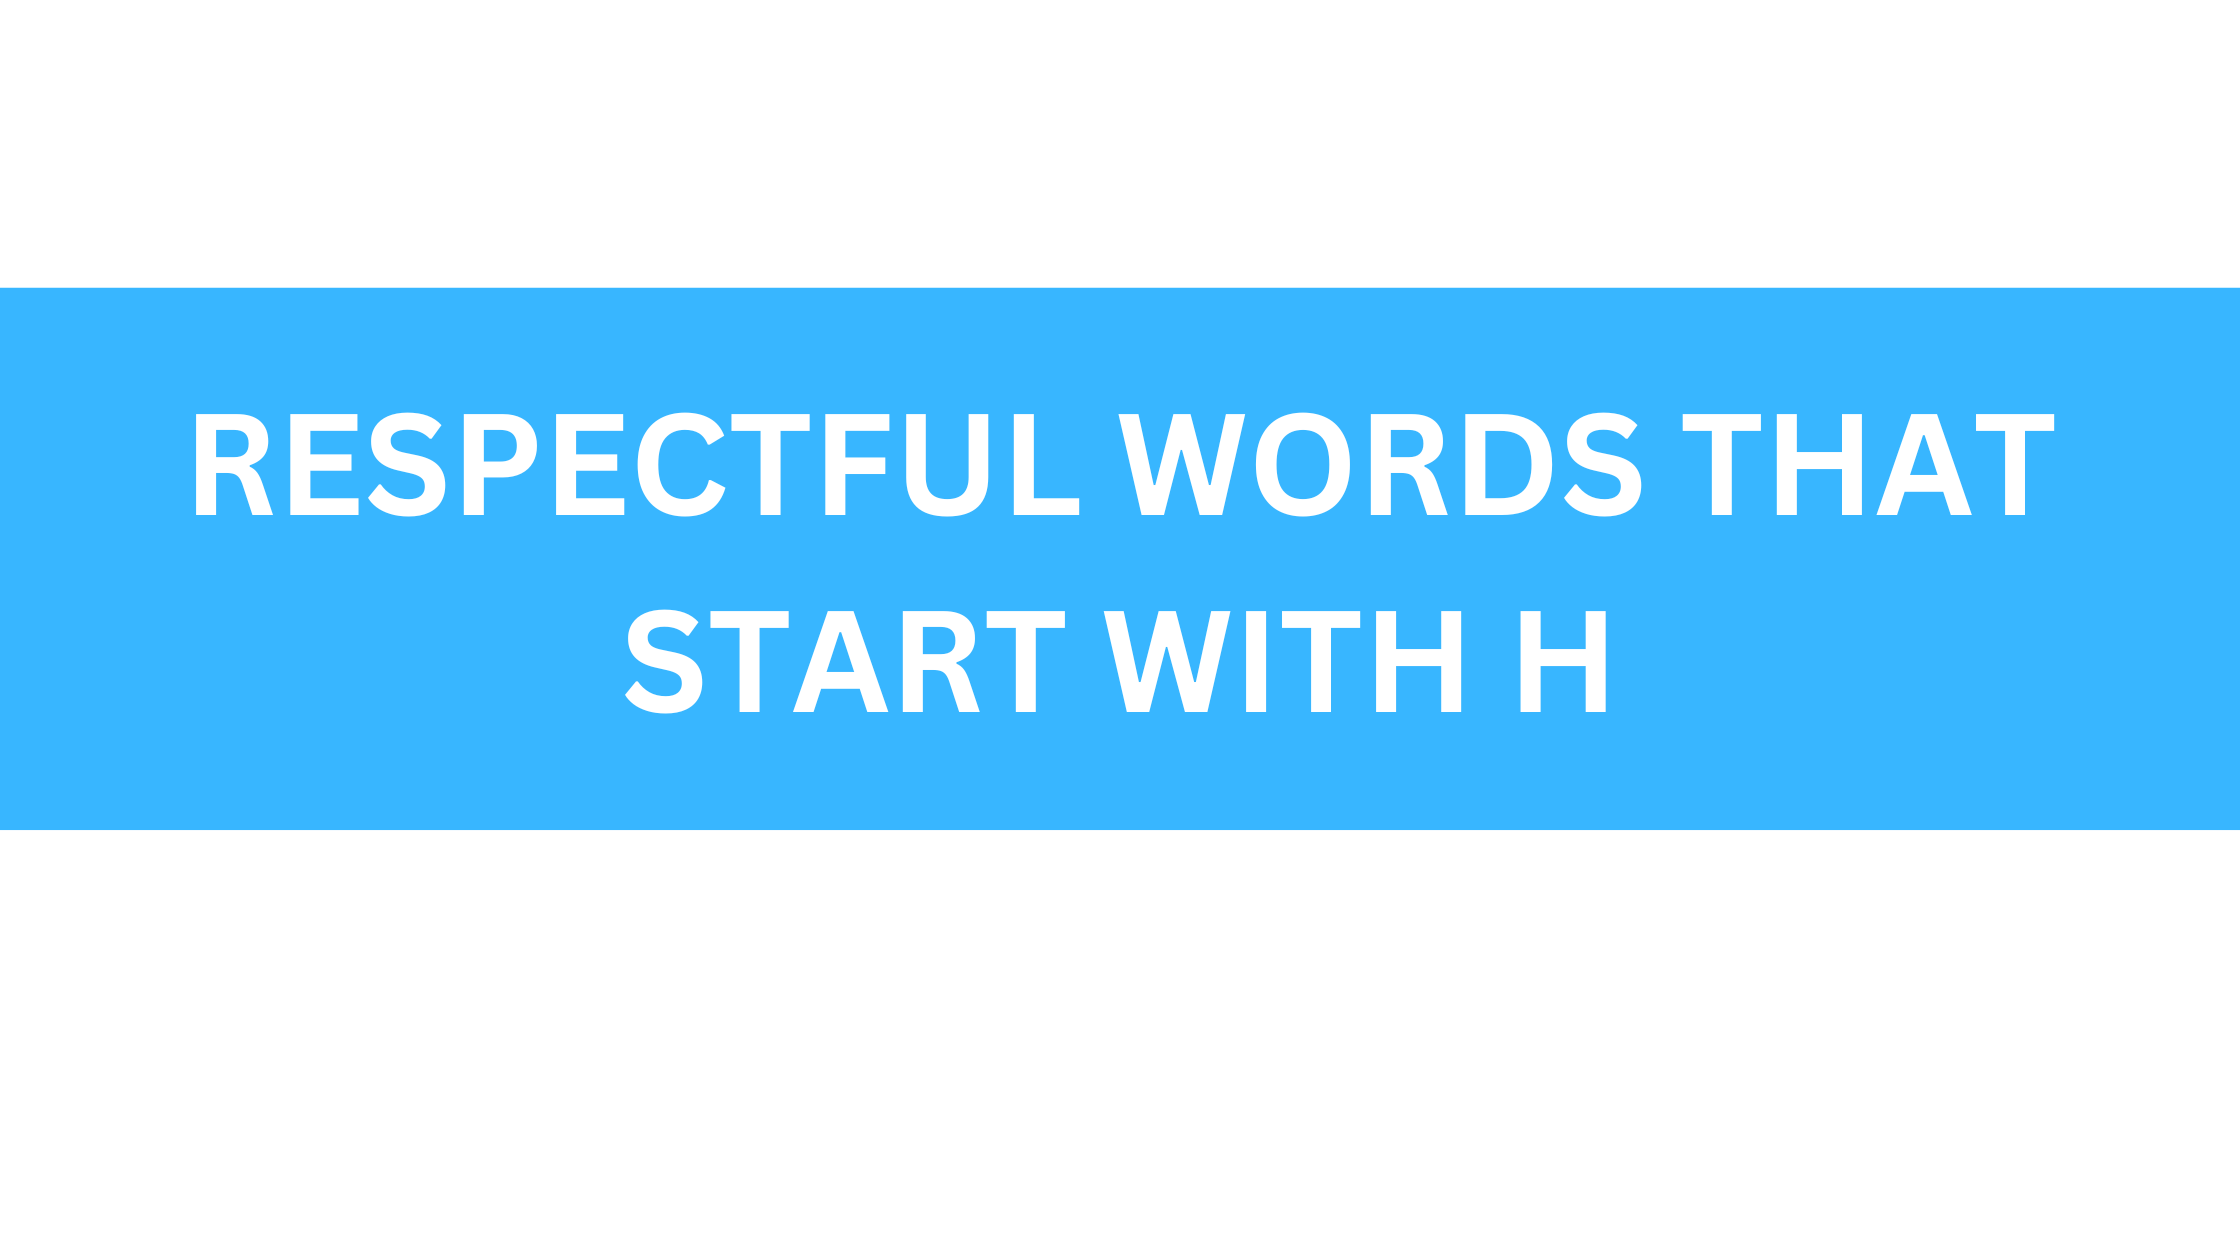 respectful words that start with h